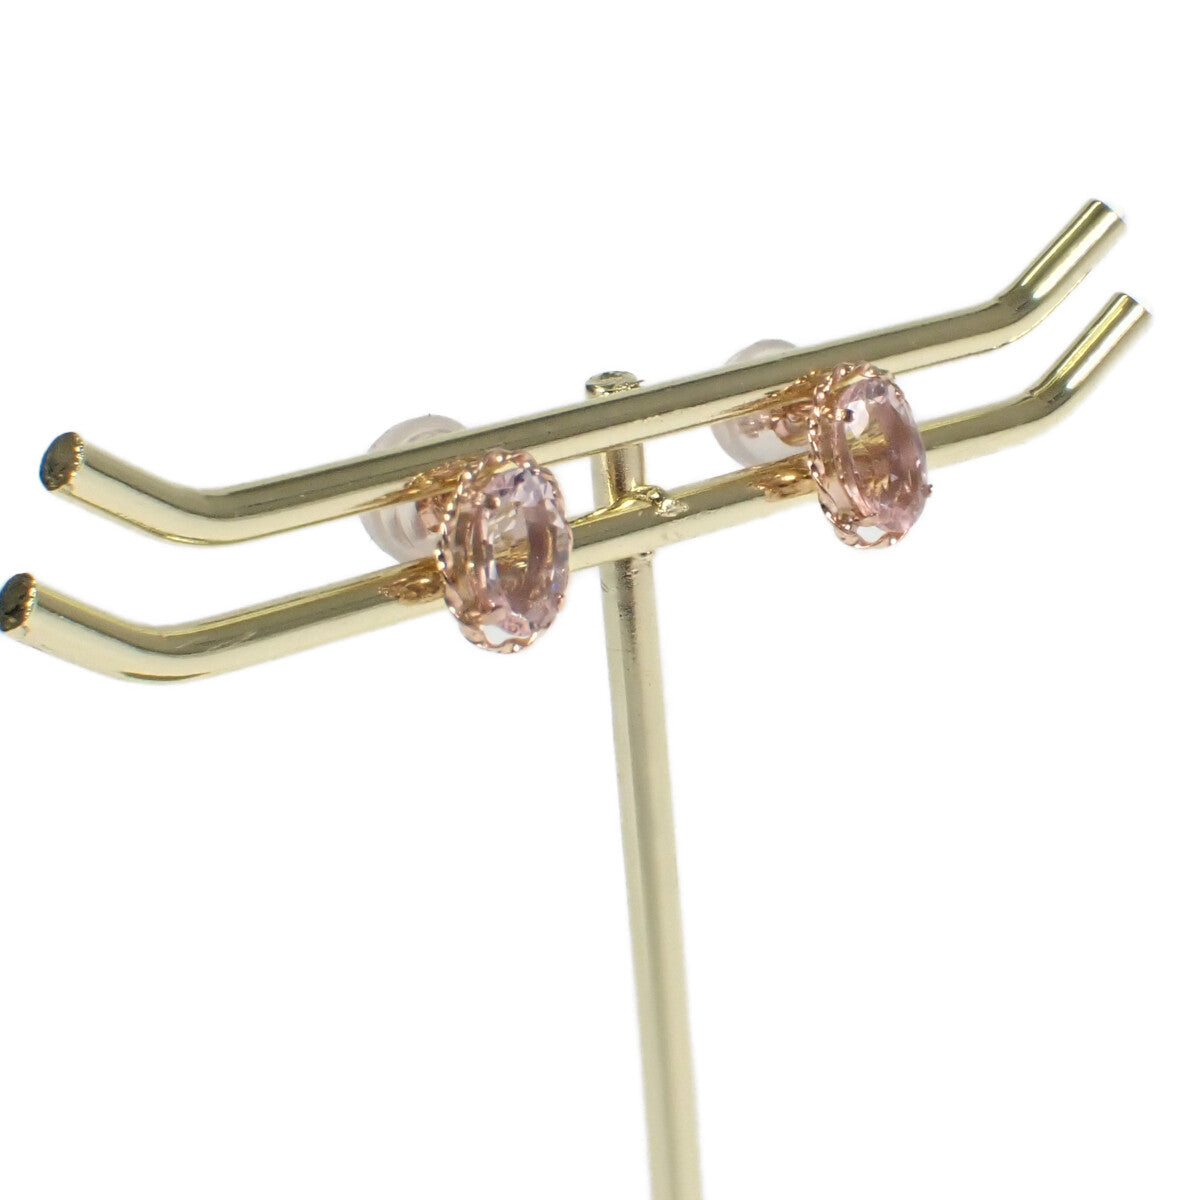 Women's 0.35ct Morganite Design Earrings in K18 Pink Gold, Gold, Never Used, Pre-owned